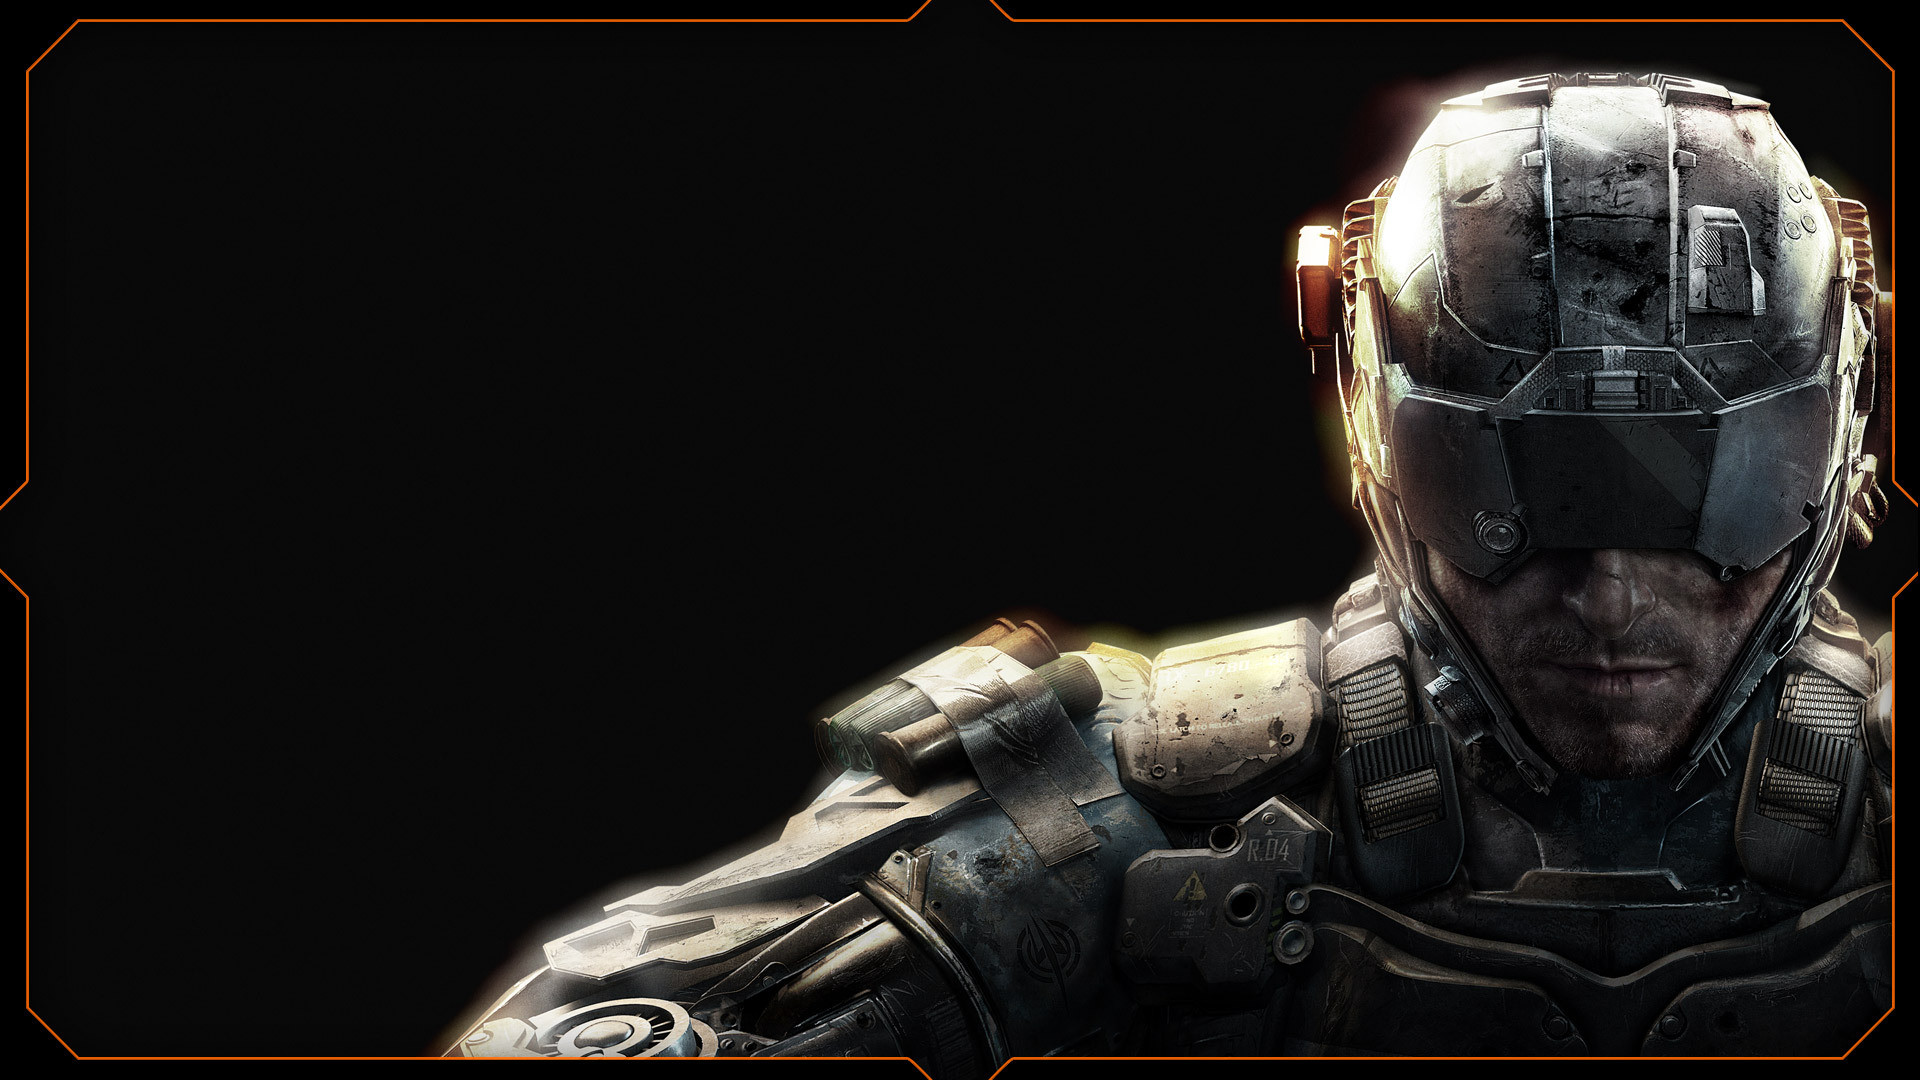 1920x1080 Image - Call of Duty Black Ops III Background Winslow Accord  Cyber-Soldier.jpg | Steam Trading Cards Wiki | FANDOM powered by Wikia